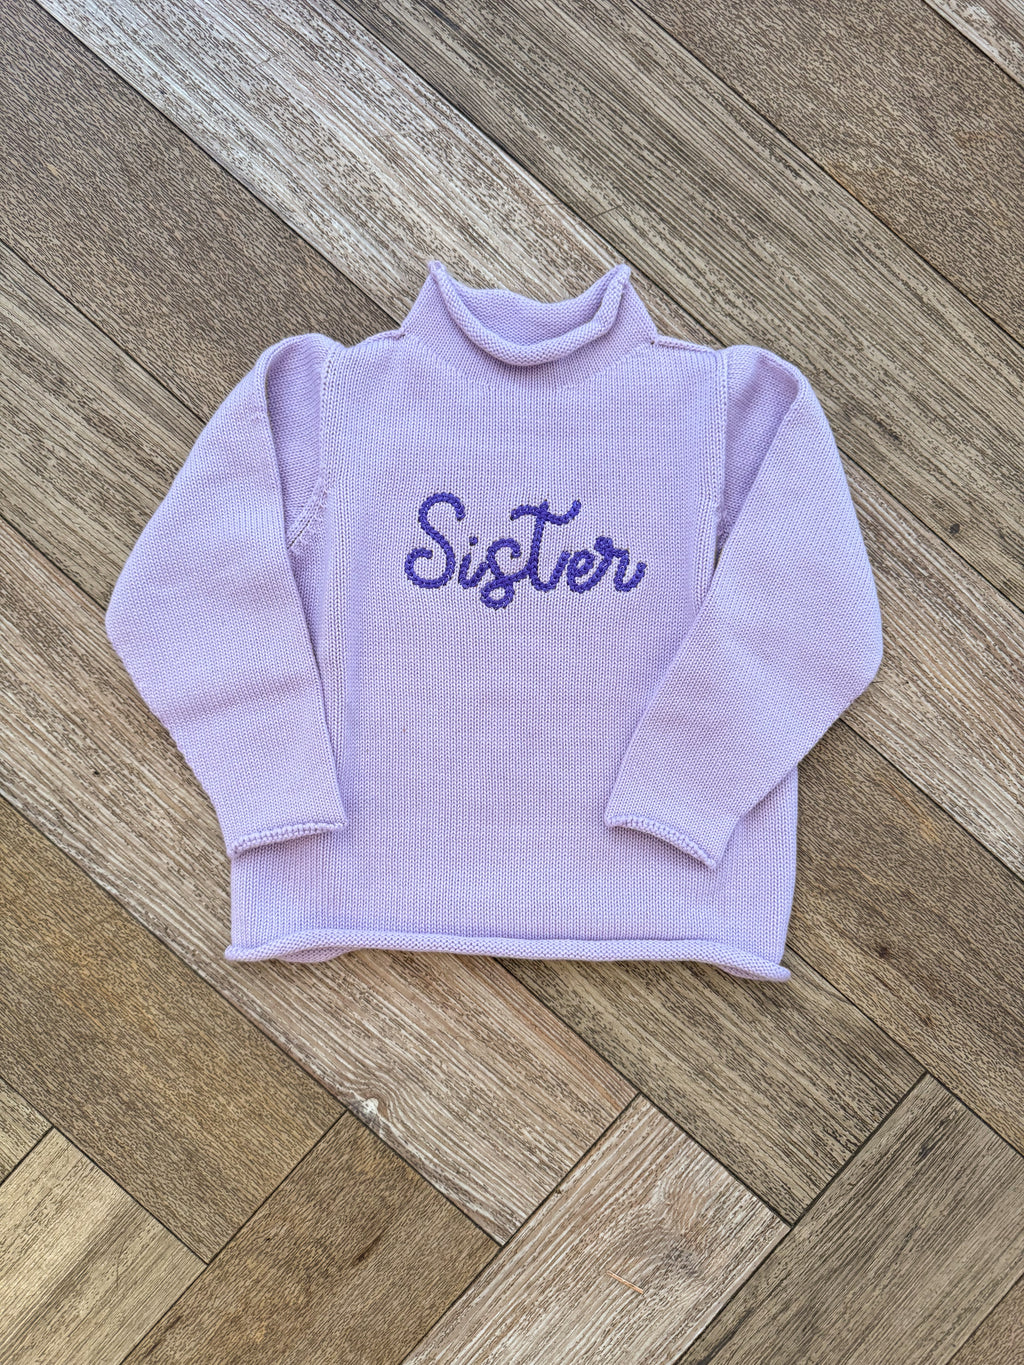 A Soft Idea Roll Neck Sweater in Lavender with Sister